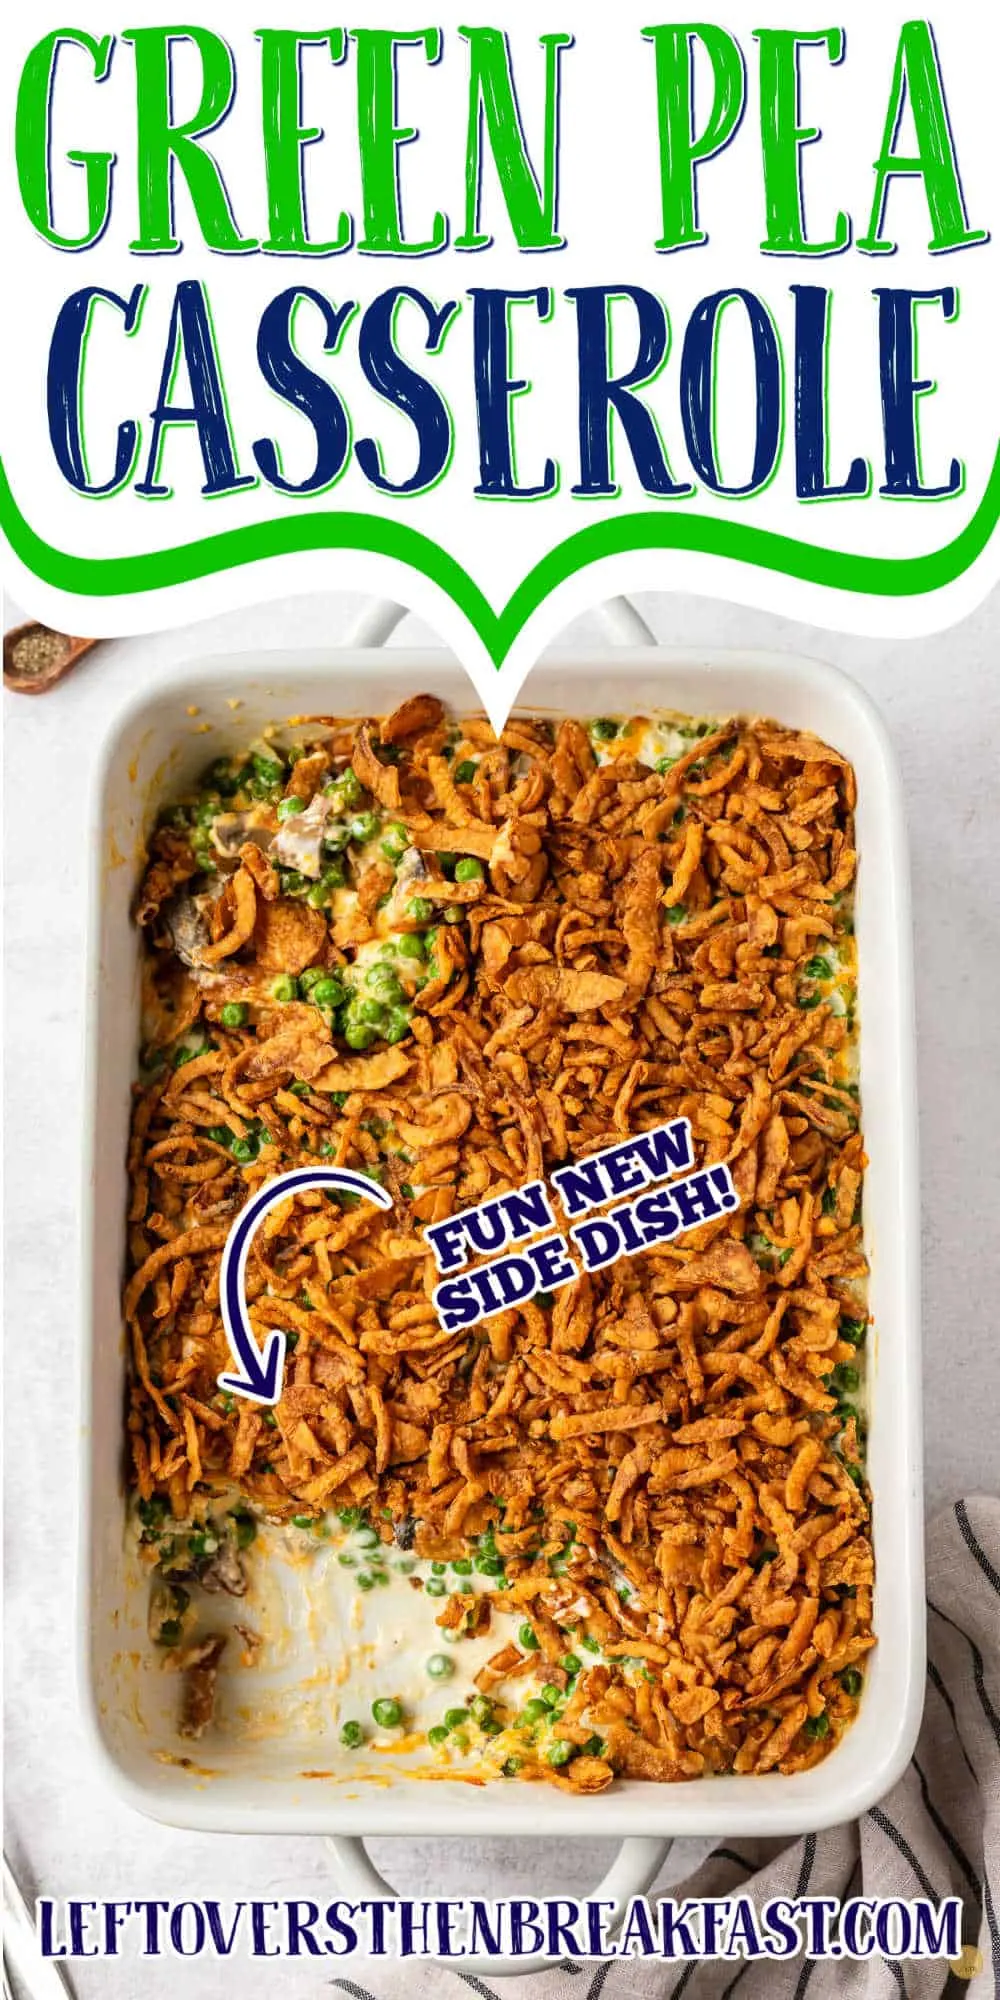 casserole with text "fun new side dish"